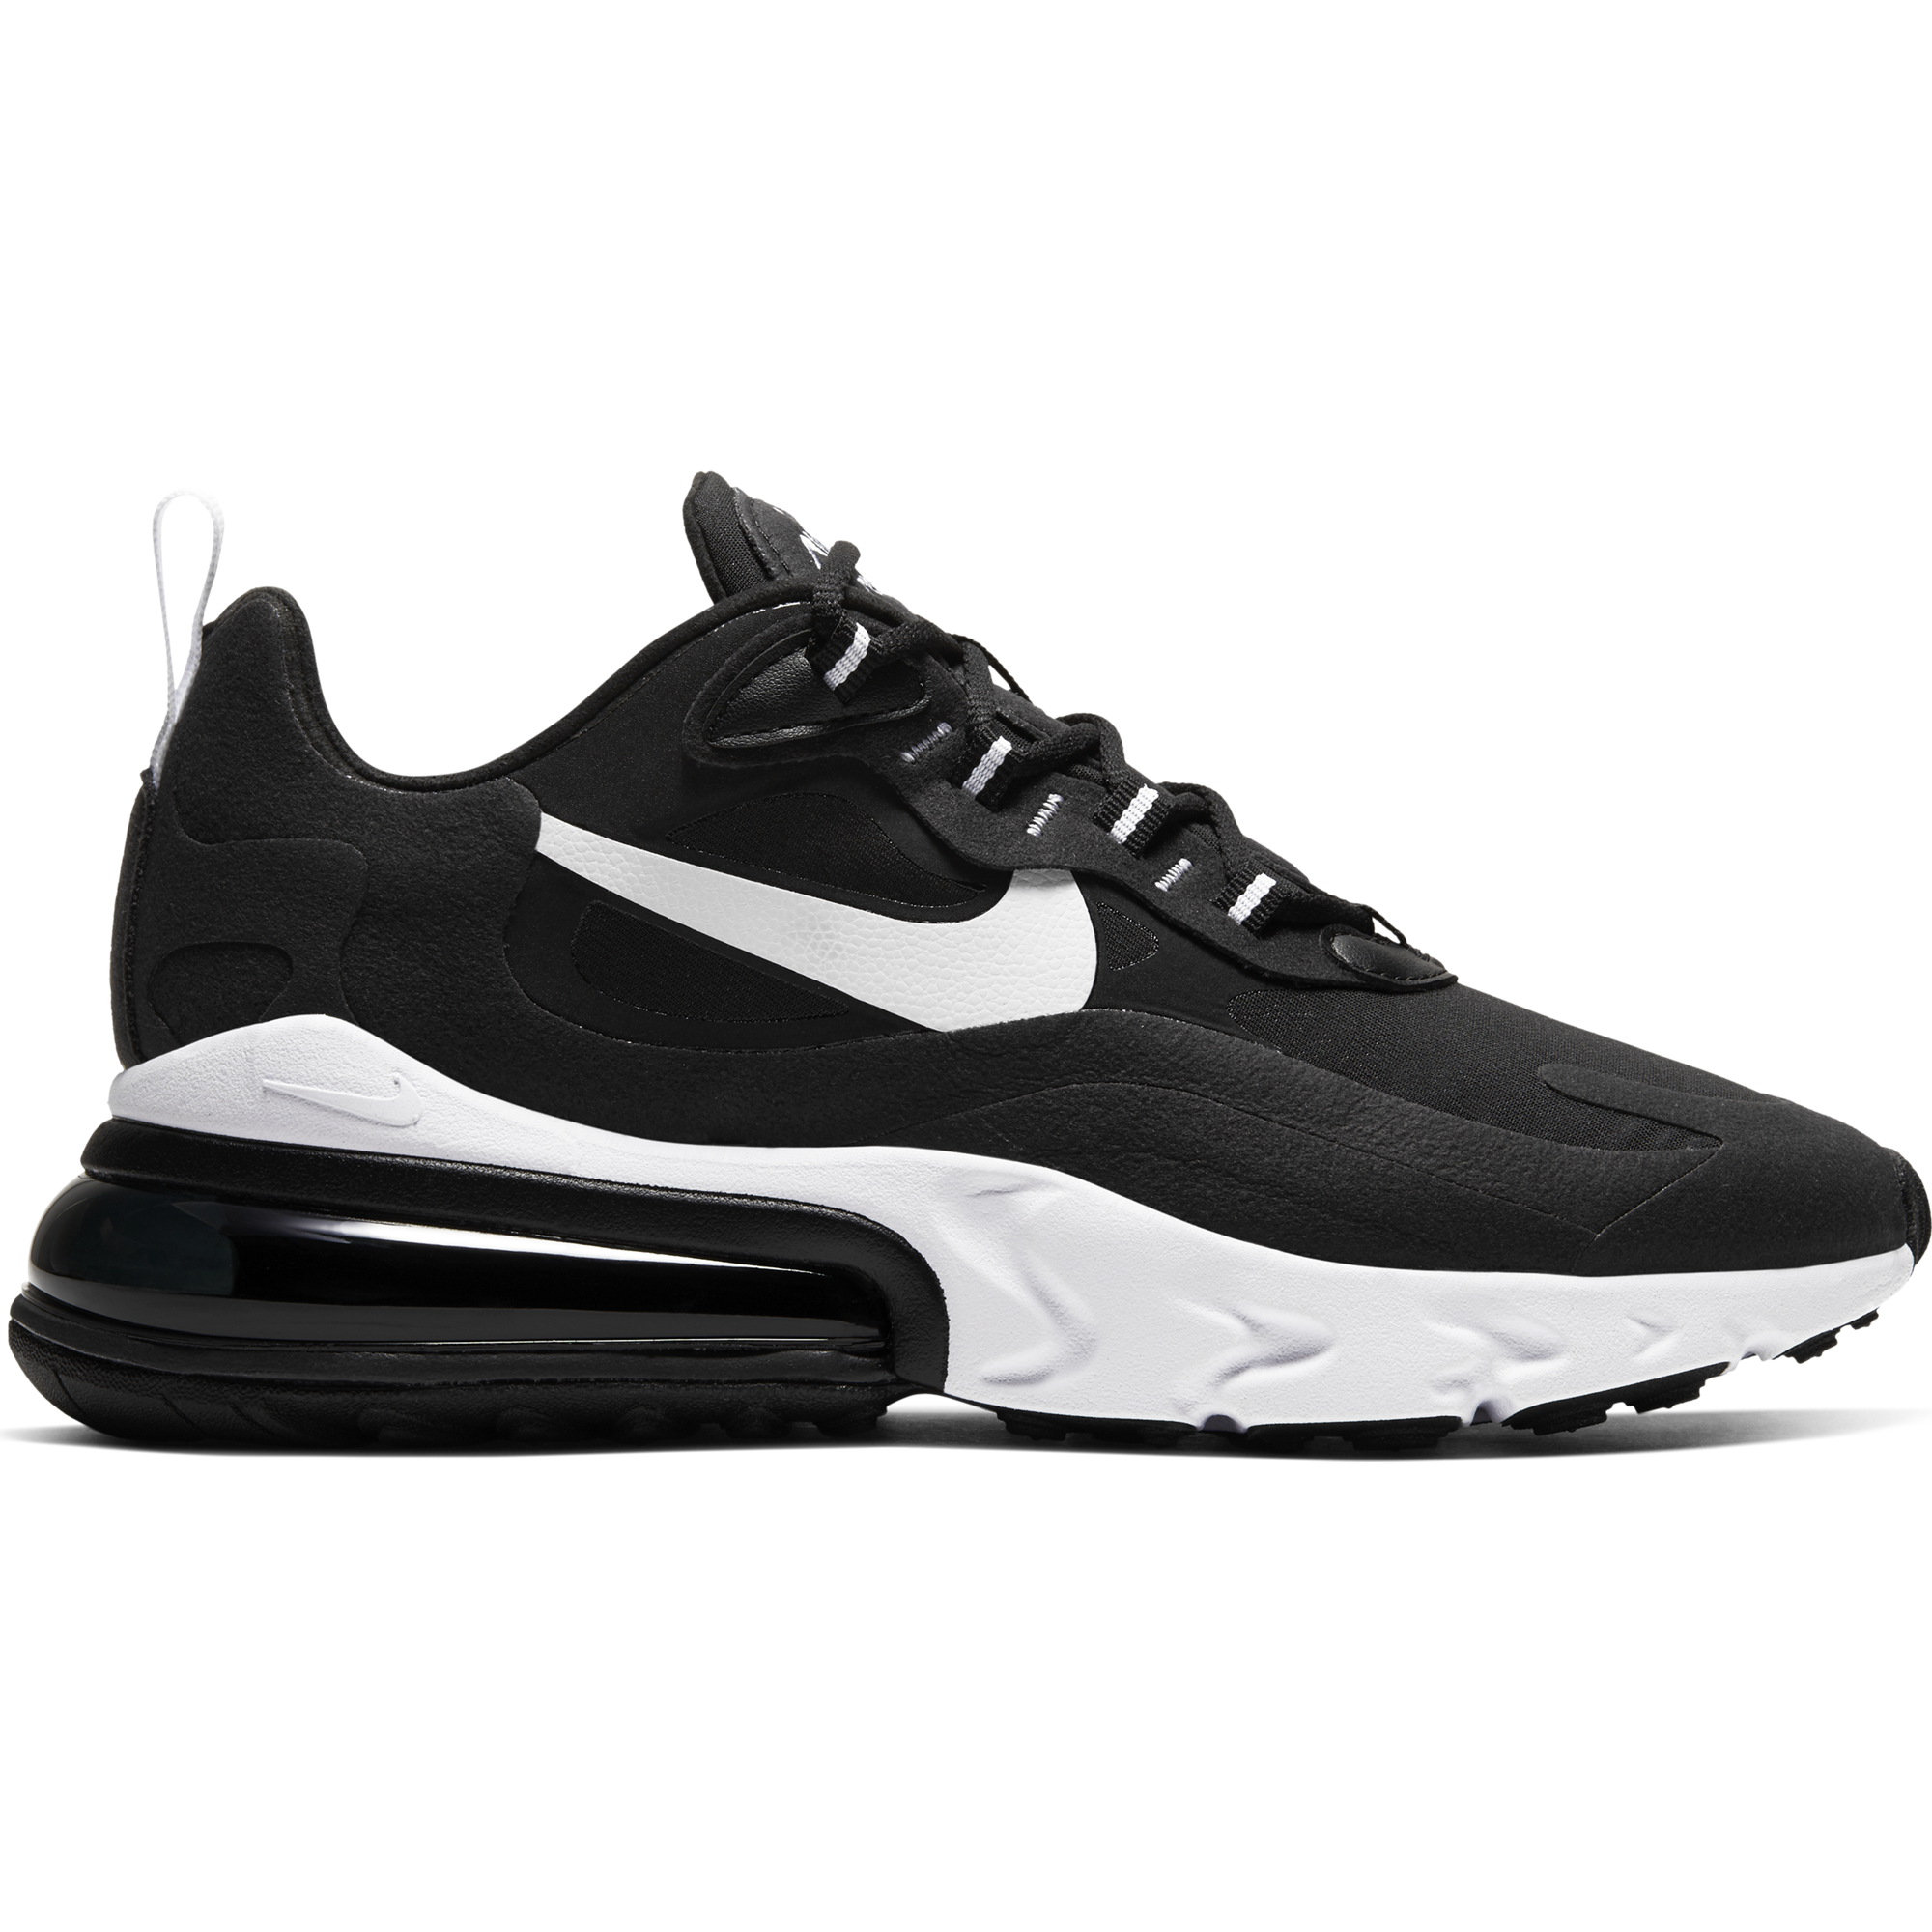 Nike Air Max 270 Black And White On Feet Shop Clothing Shoes Online